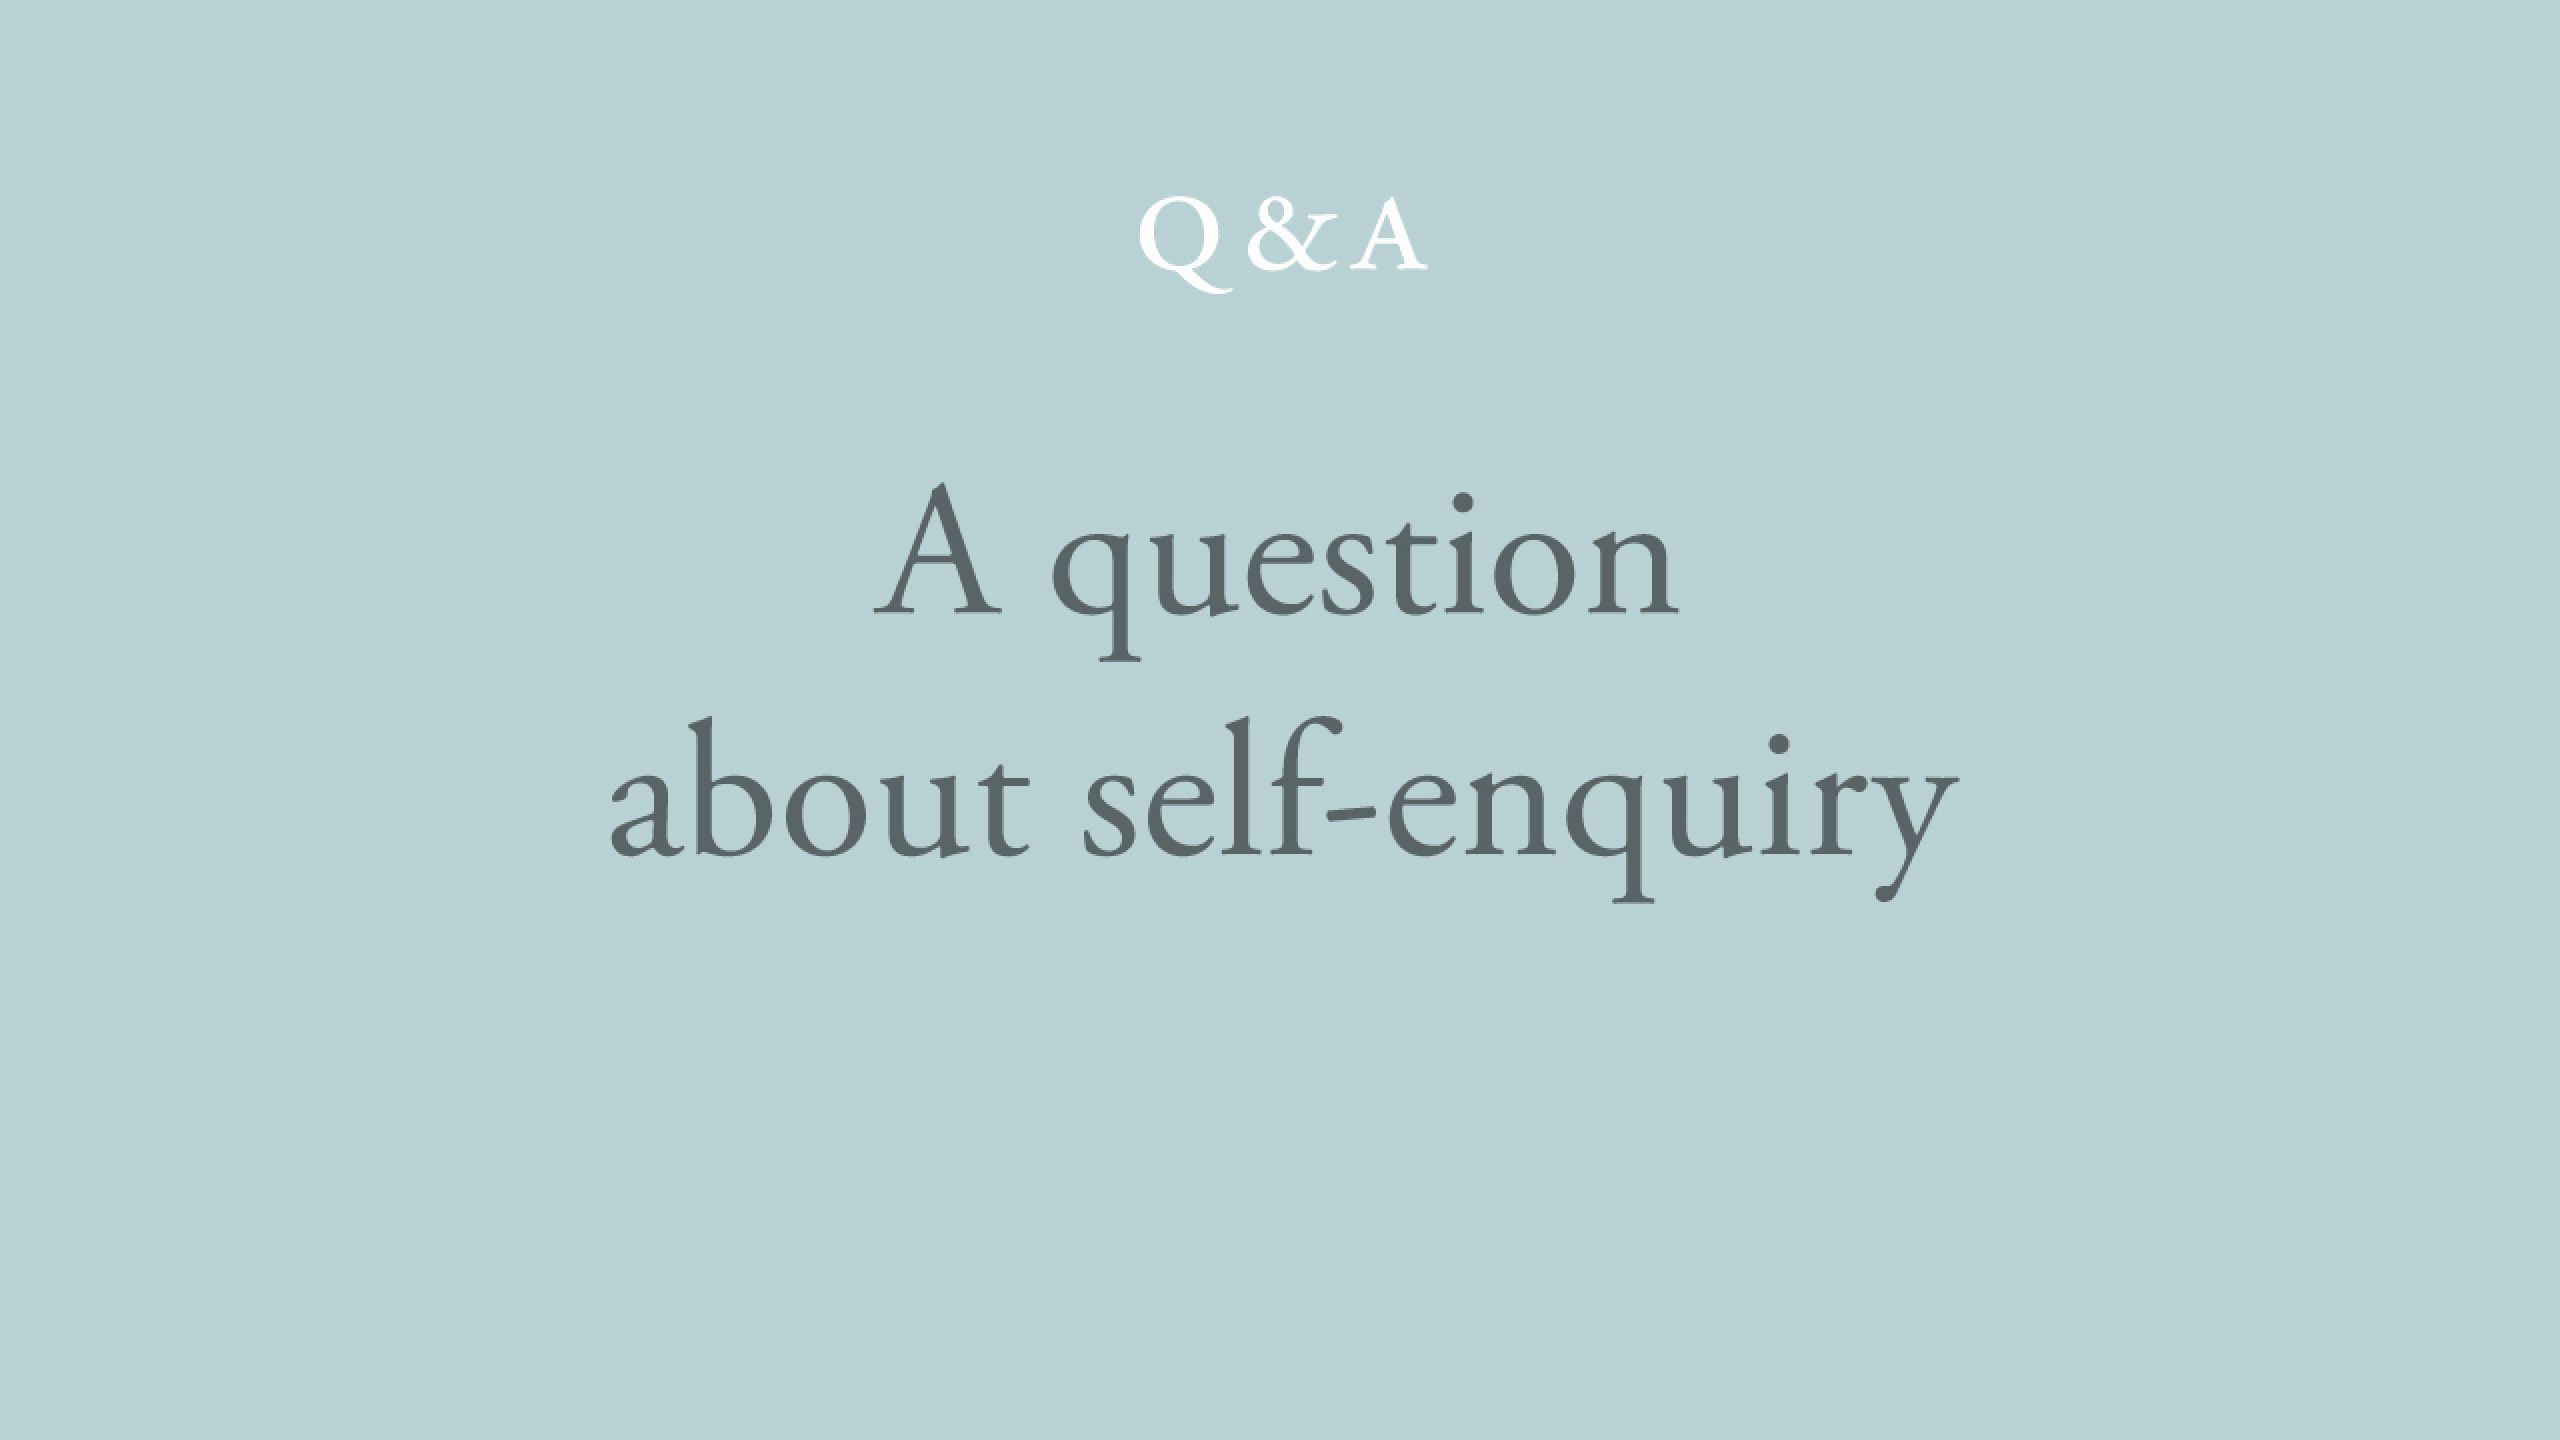 Who is doing the self-enquiry?